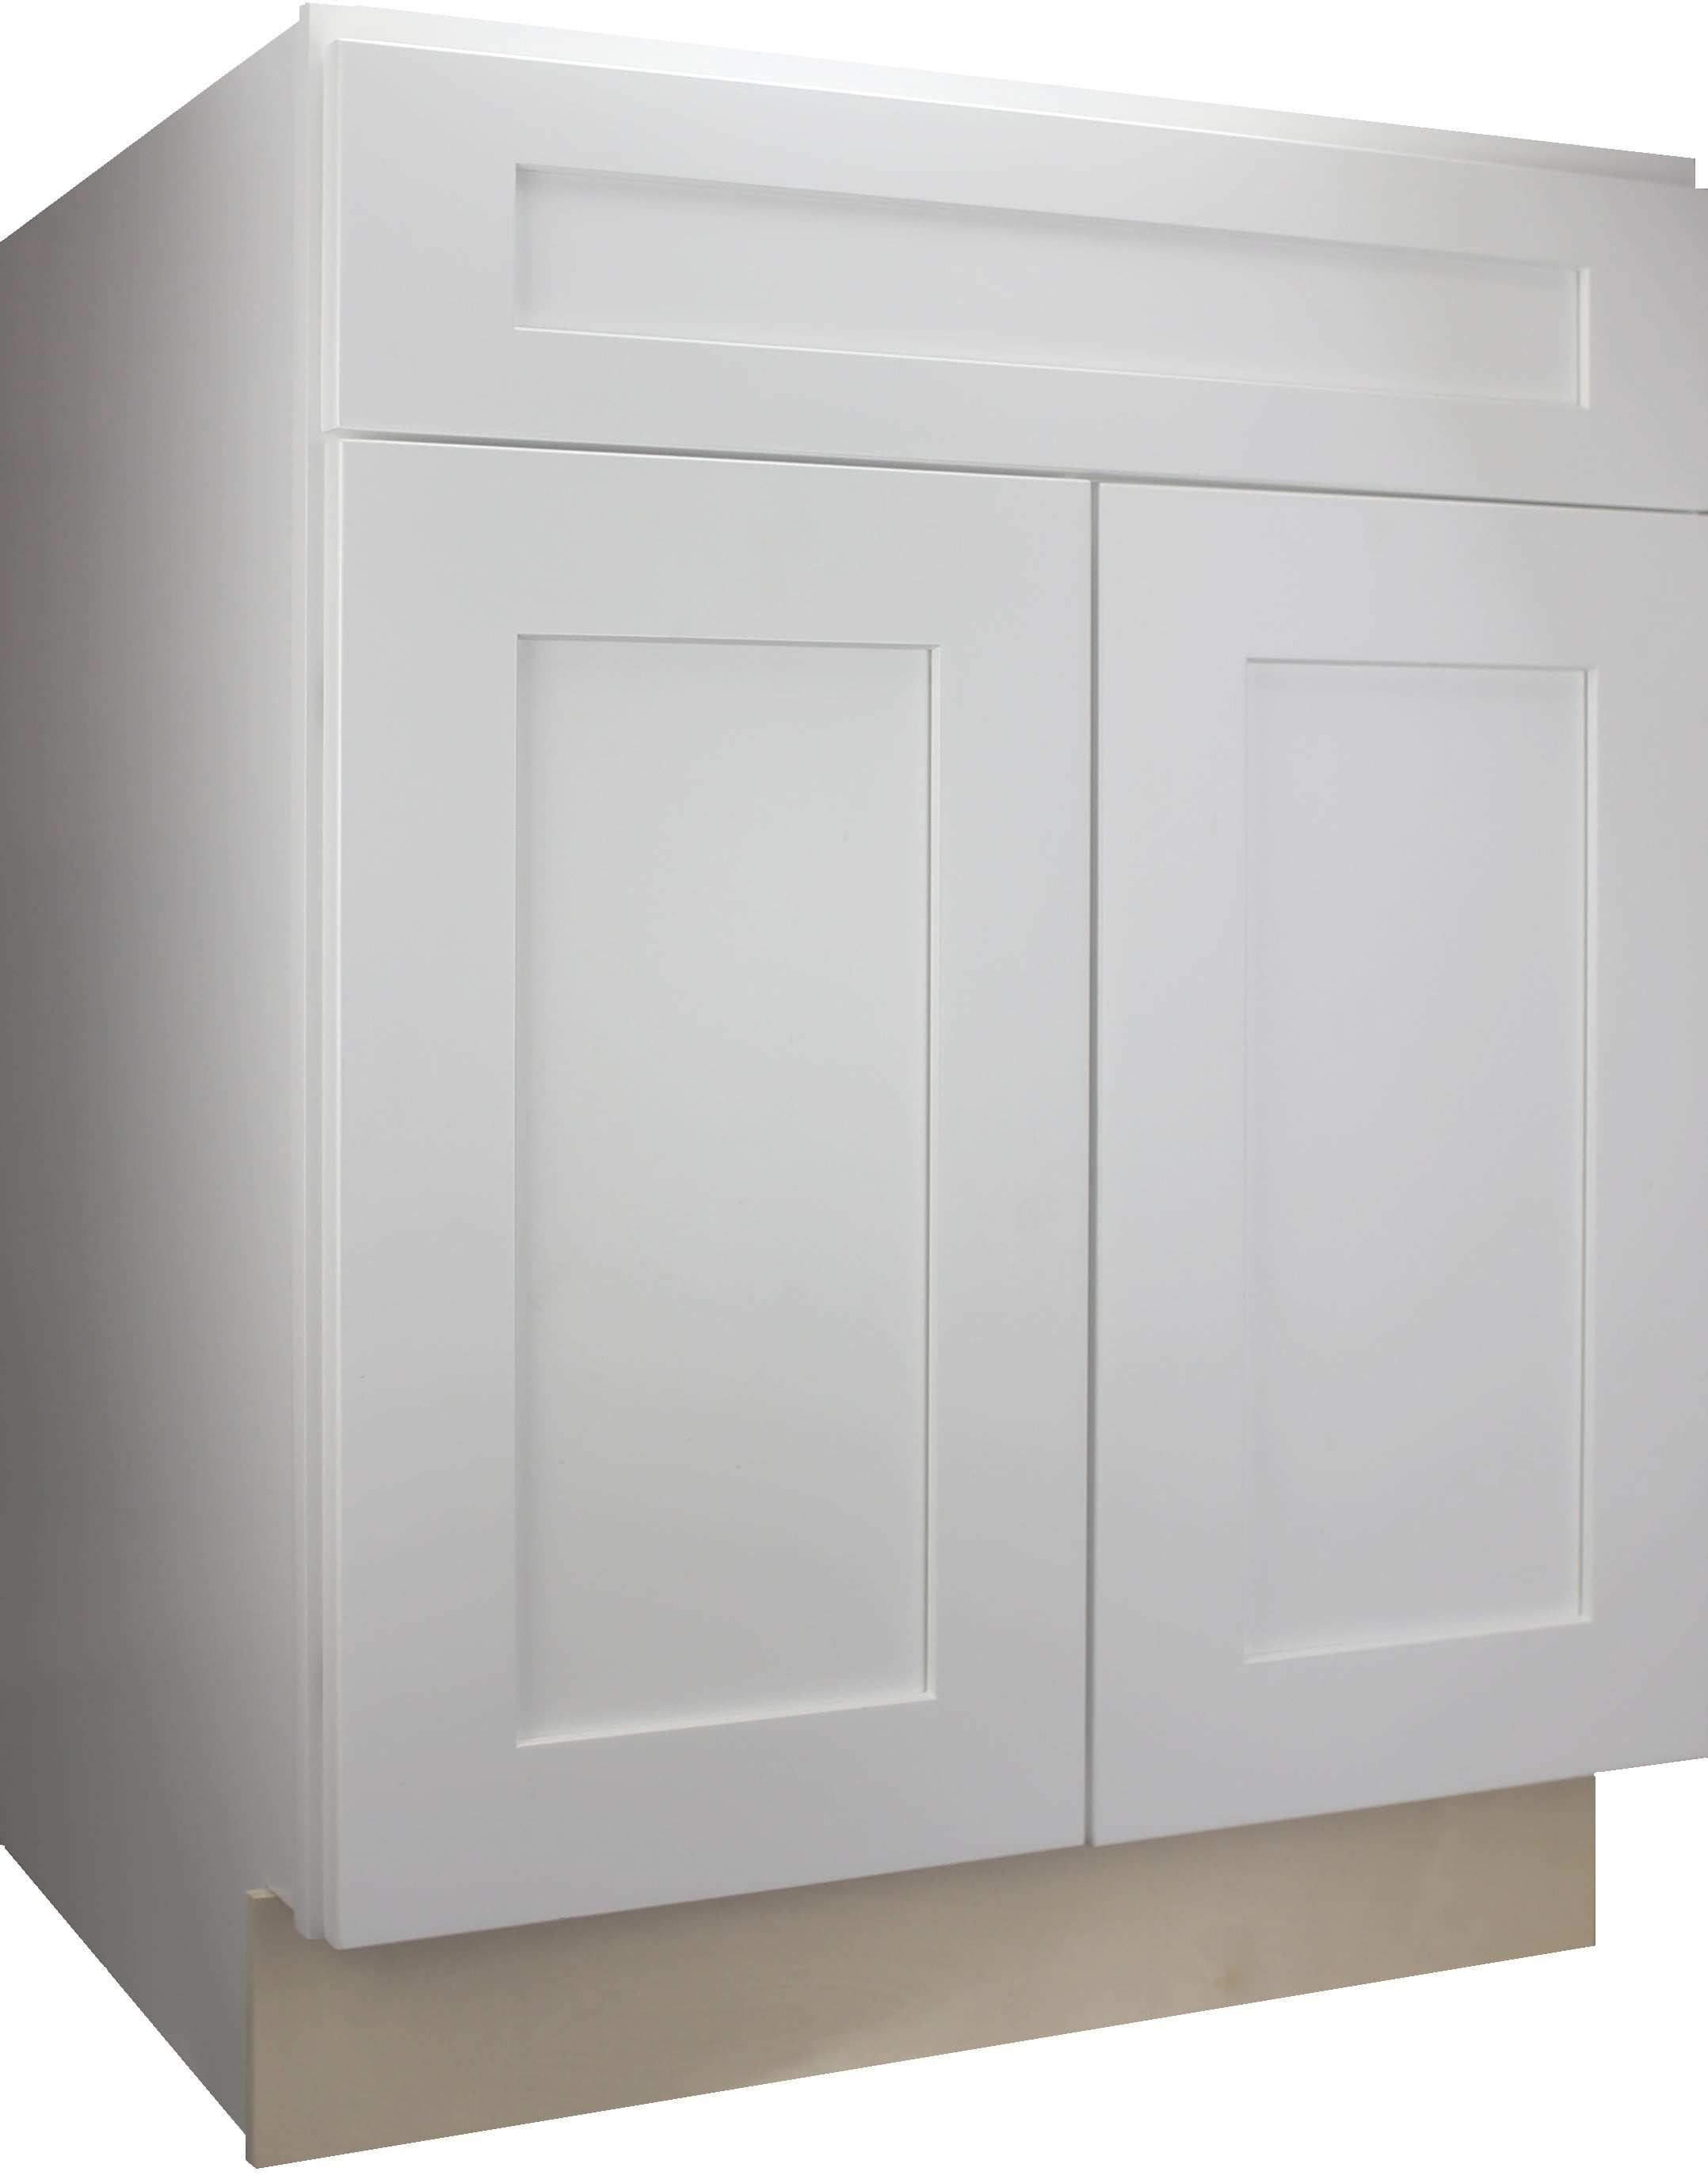 Cabinet Mania White Shaker Sb30 Sink Base Cabinet 30 Wide Rta Kitchen Cabinet Ready To Assemble 100 All Wood Construction Lowest Price Online Walmart Com Walmart Com